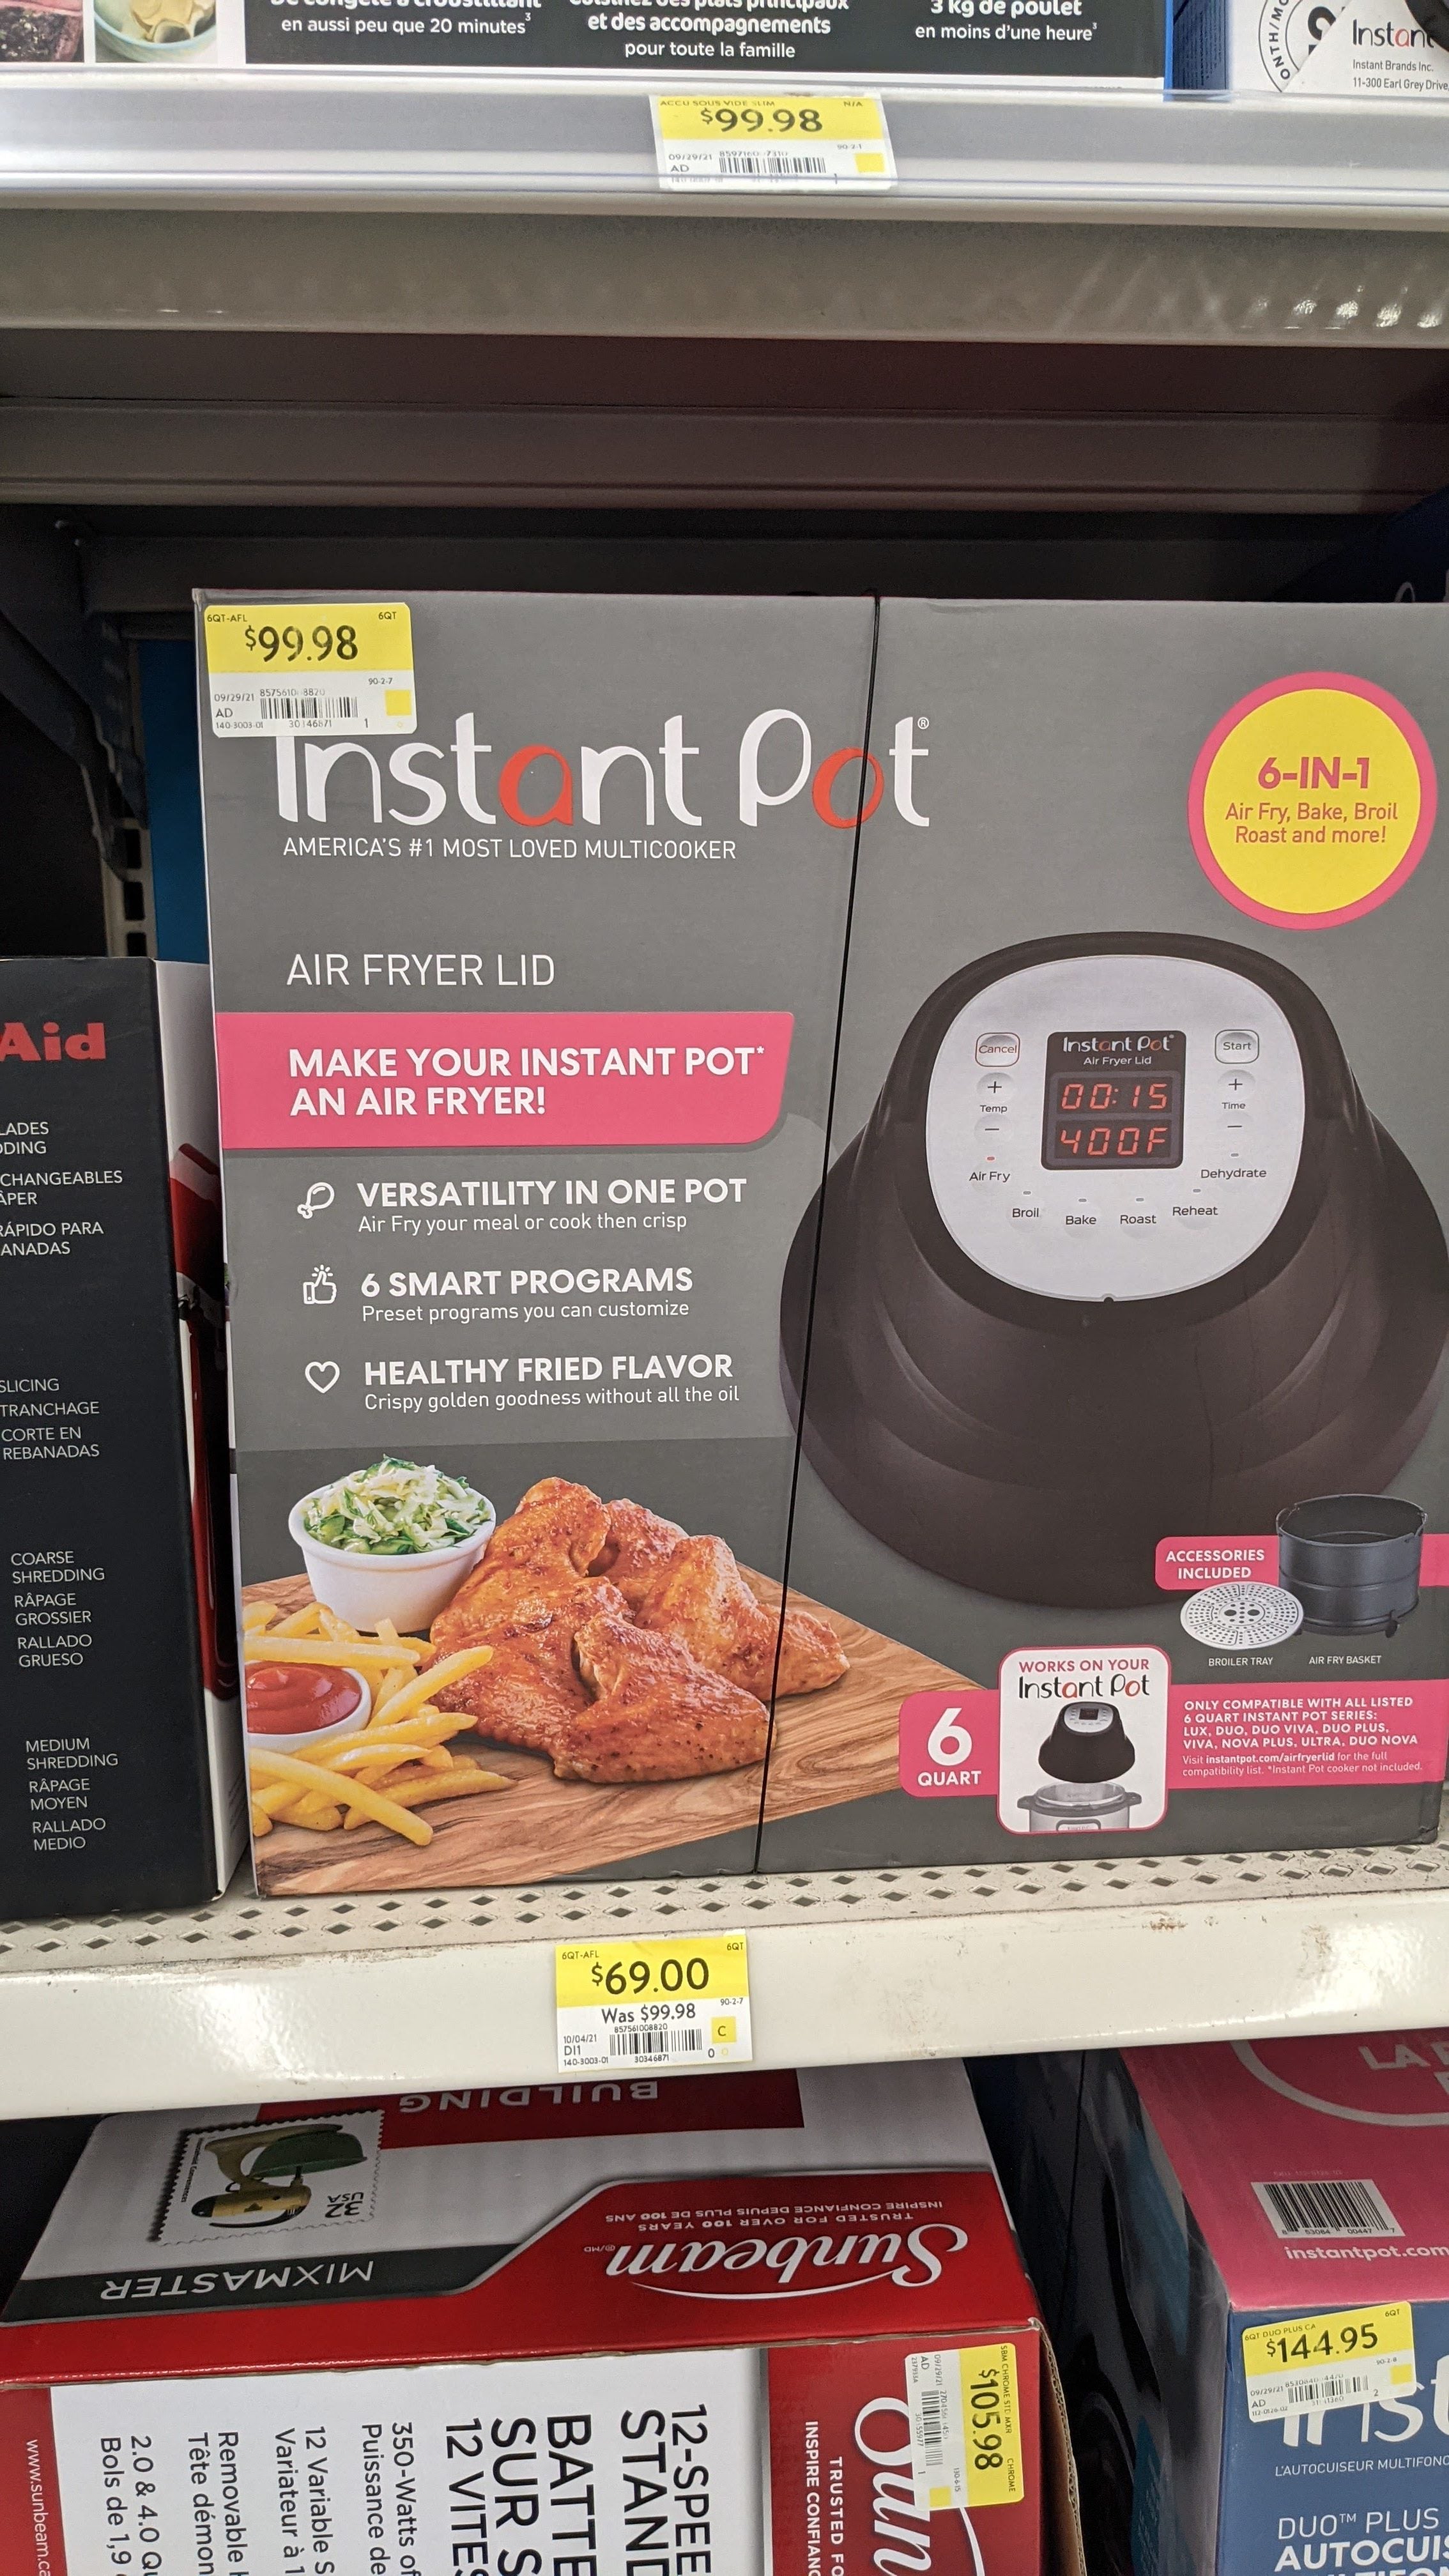 You Can Buy The Ninja AF100 4-Quart Air Fryer For Only $40